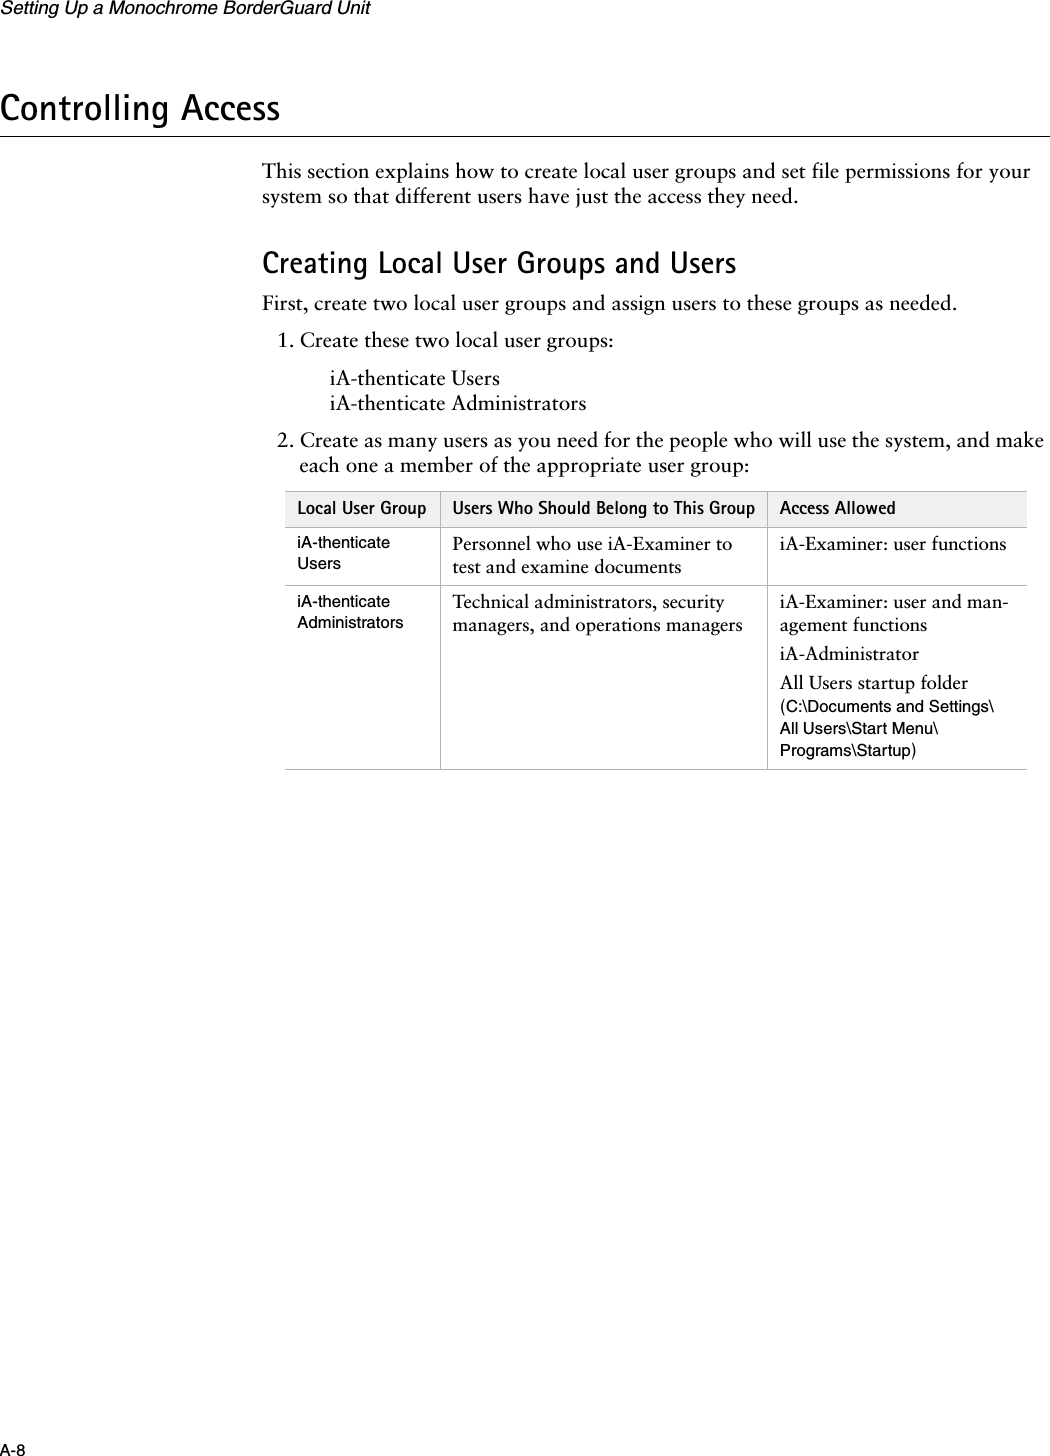 Setting Up a Monochrome BorderGuard UnitA-8Controlling AccessThis section explains how to create local user groups and set file permissions for your system so that different users have just the access they need.Creating Local User Groups and UsersFirst, create two local user groups and assign users to these groups as needed.1. Create these two local user groups:iA-thenticate UsersiA-thenticate Administrators2. Create as many users as you need for the people who will use the system, and make each one a member of the appropriate user group:Local User Group Users Who Should Belong to This Group Access AllowediA-thenticate UsersPersonnel who use iA-Examiner to test and examine documentsiA-Examiner: user functionsiA-thenticate AdministratorsTechnical administrators, security managers, and operations managersiA-Examiner: user and man-agement functionsiA-AdministratorAll Users startup folder (C:\Documents and Settings\All Users\Start Menu\Programs\Startup)